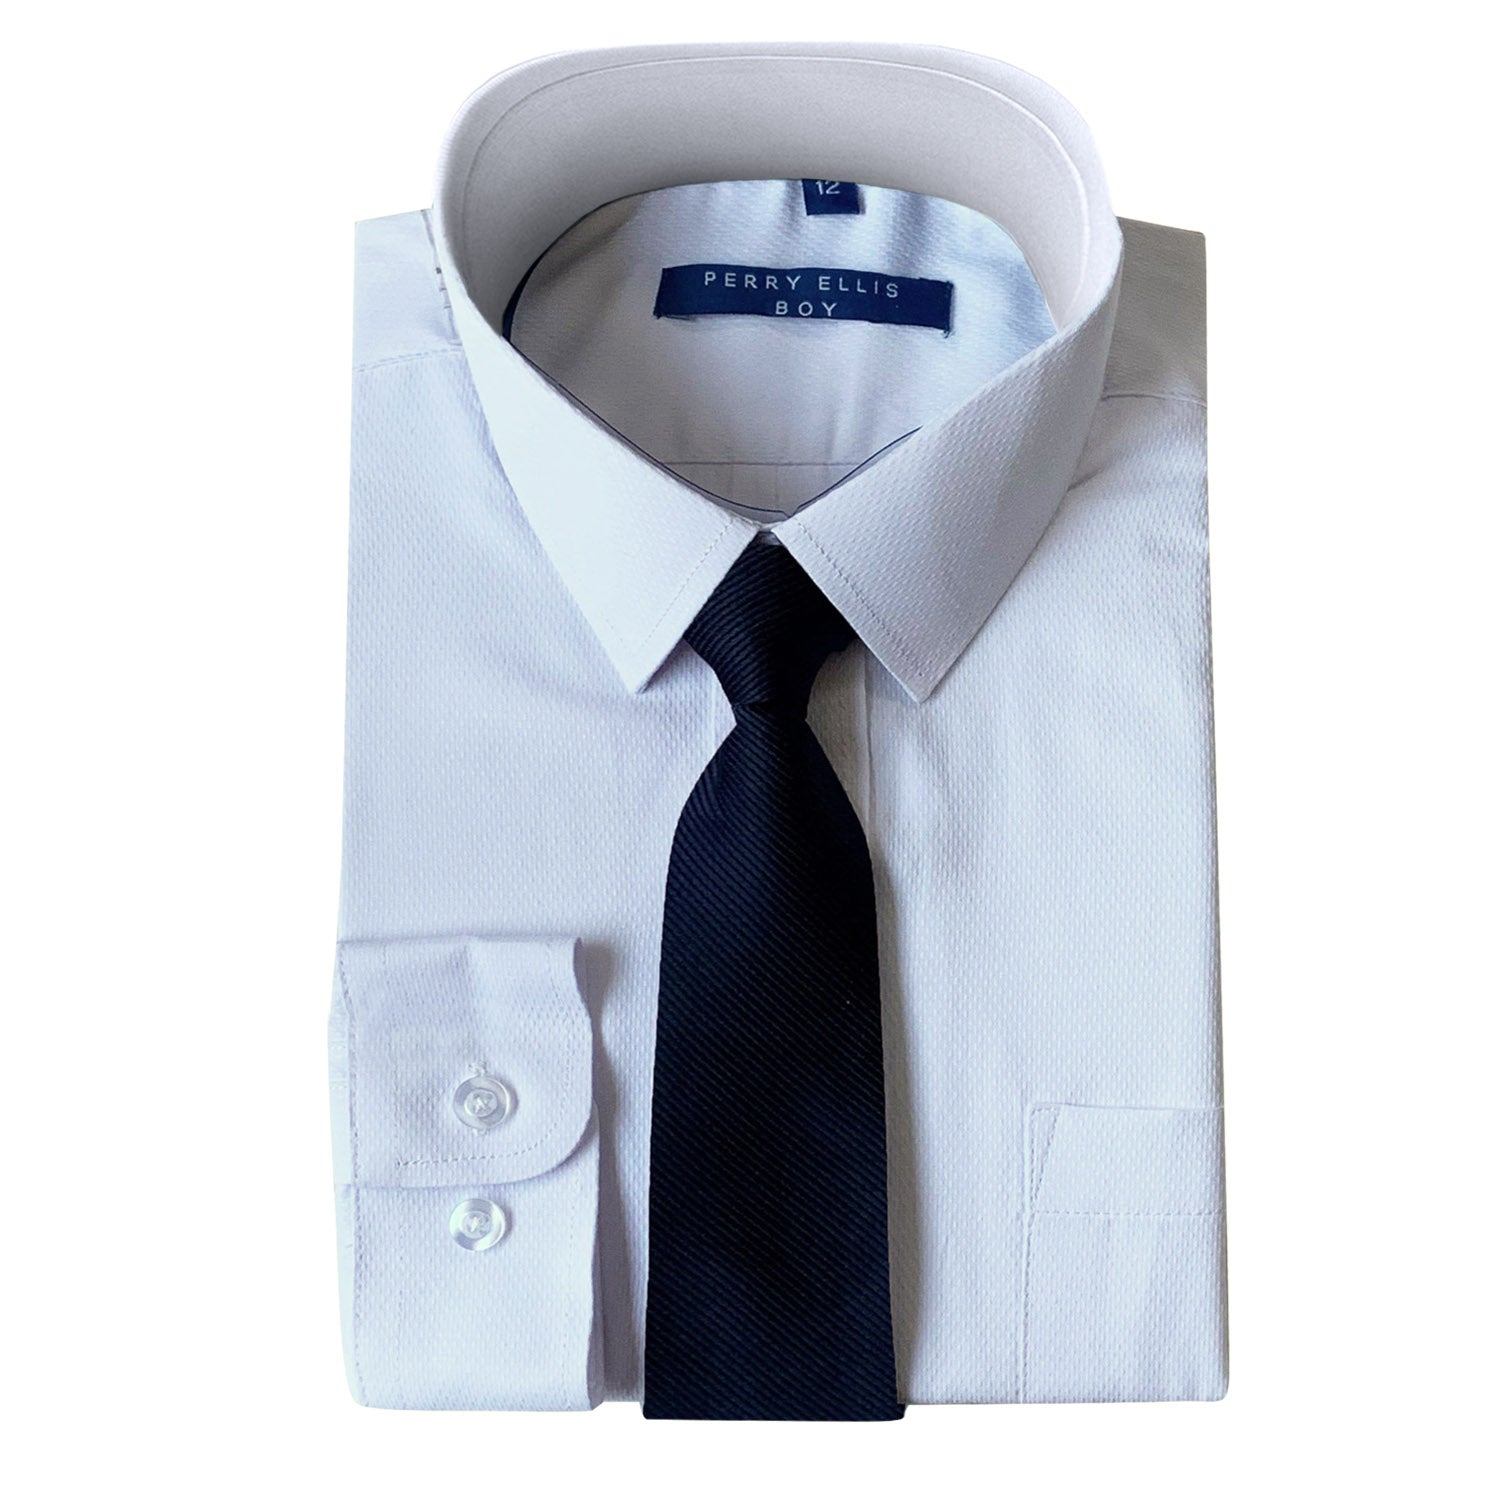 Perry Ellis Boys Dress Shirts w Navy Tie Solid Shirts w Colored Tie